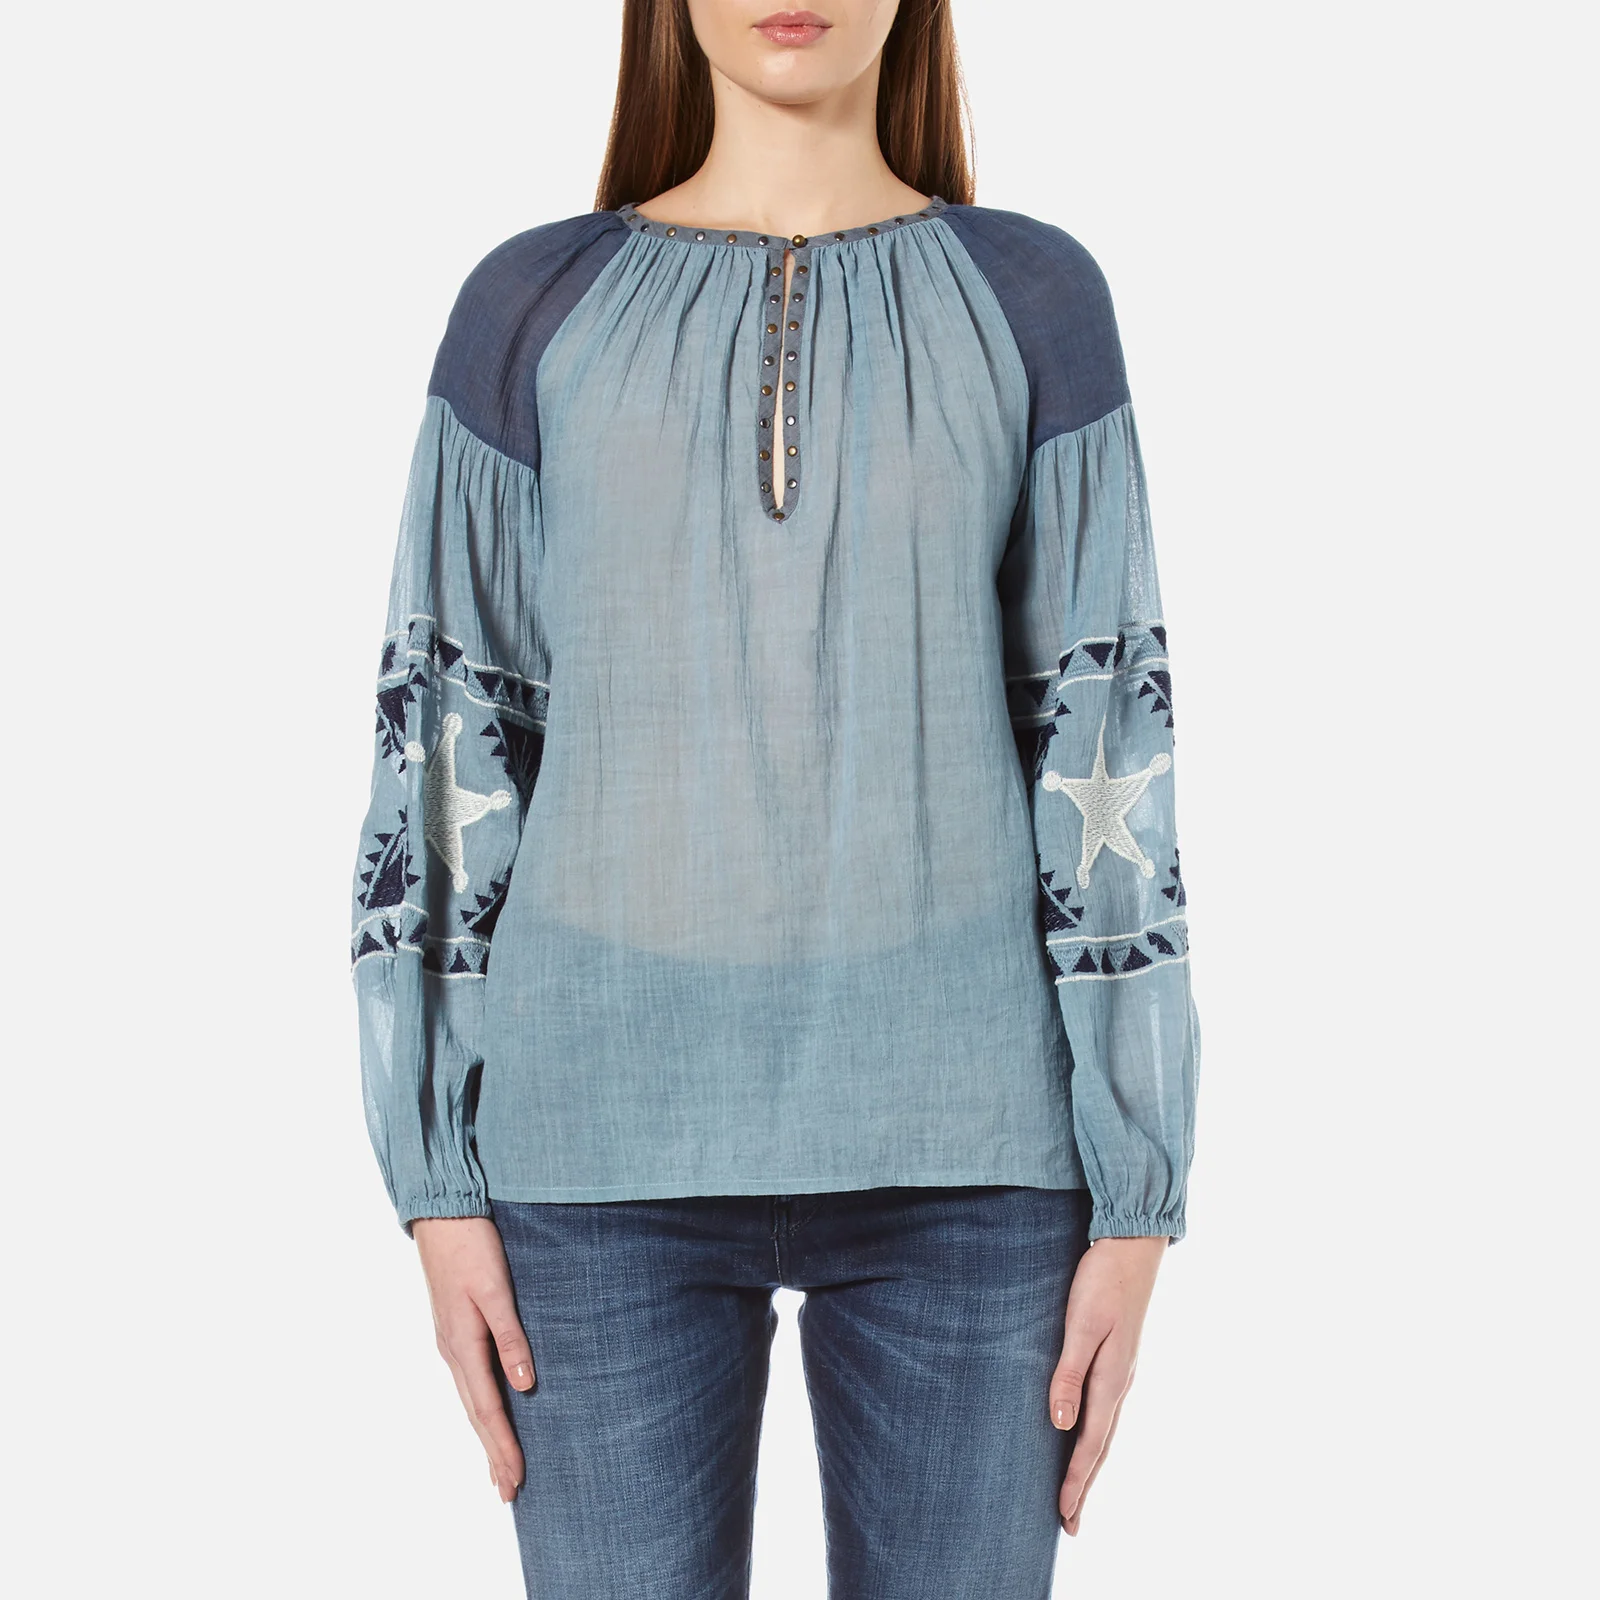 Maison Scotch Women's Sheer Cotton Tunic Top with Special Embroideries - Blue Image 1